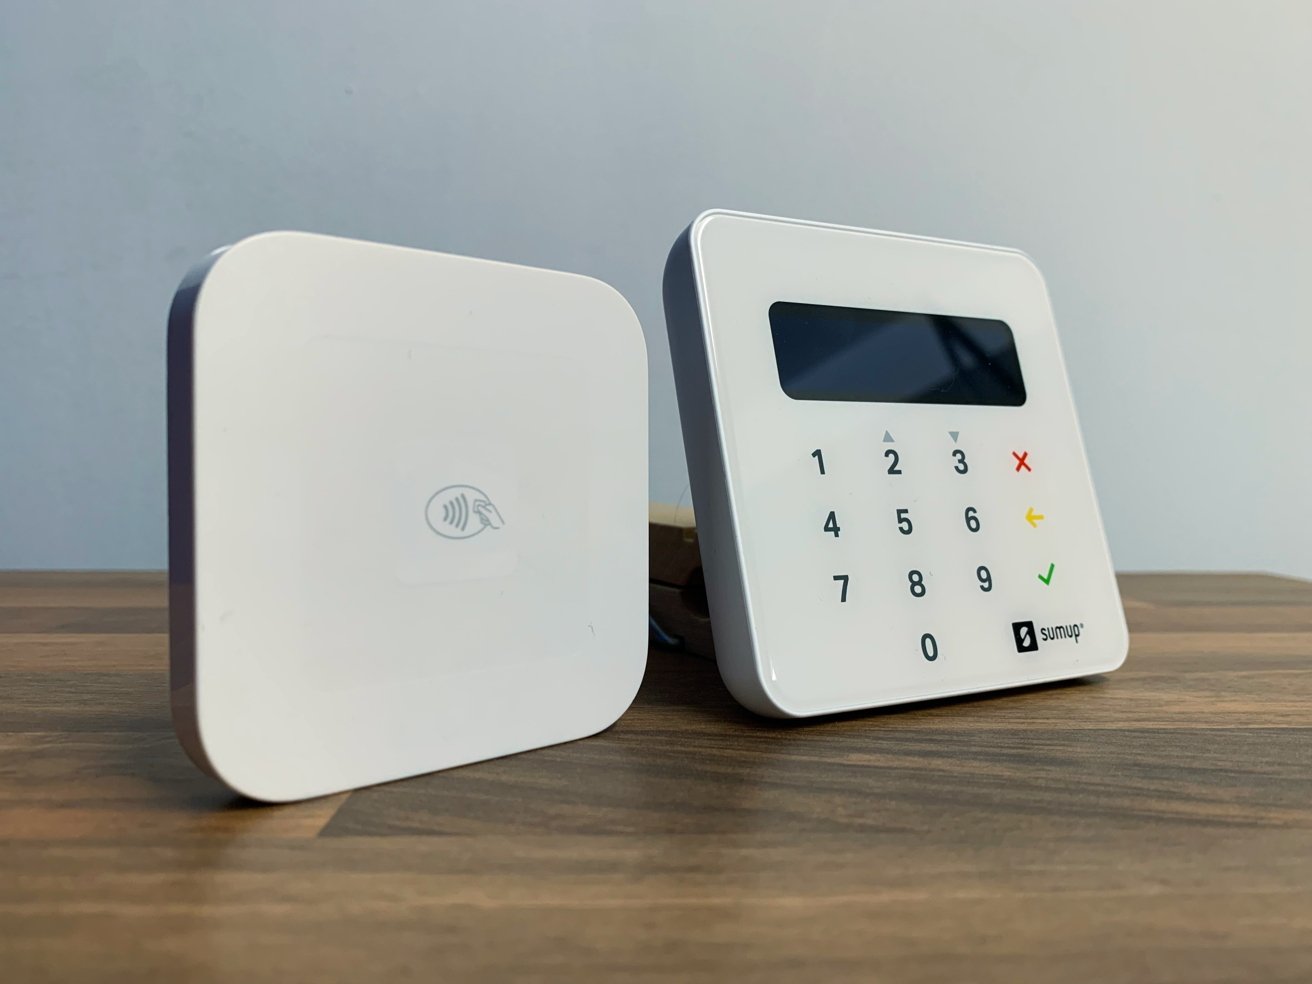 Card readers by Square (Left) and SumUp (right)